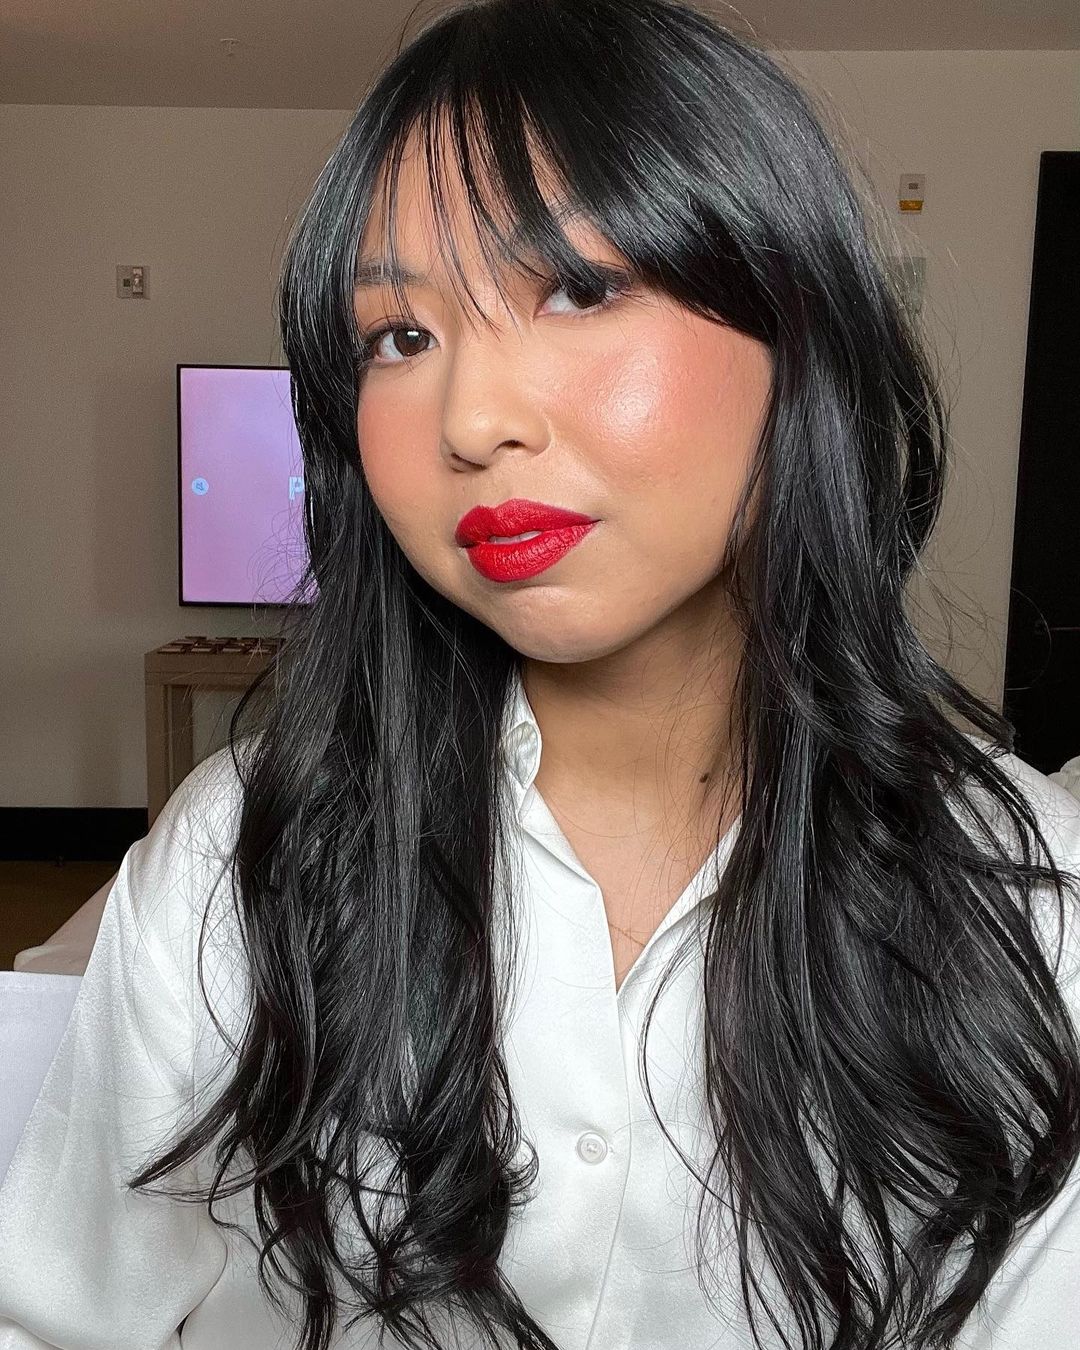 Senior beauty editor Ariana Yaptangco wearing PATRICK TA Major Headlines Matte Suede Lipstick in That's Why She's Late.